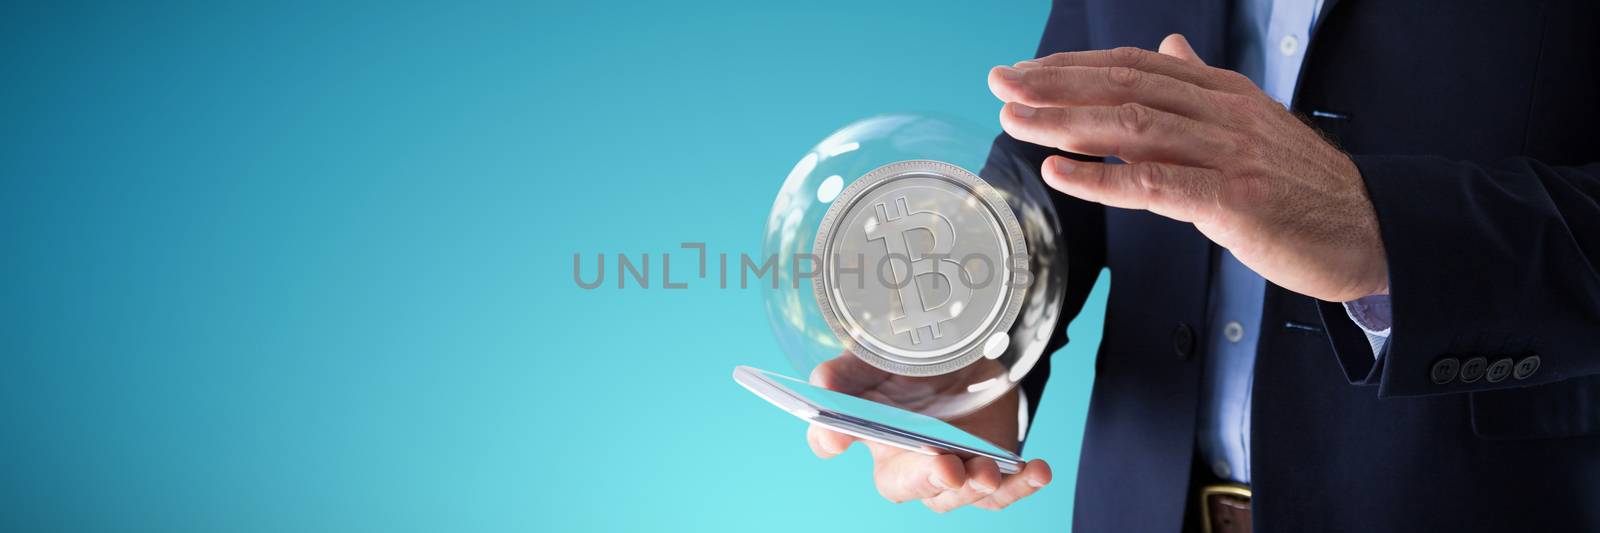 Businessman using mobile phone against abstract blue background